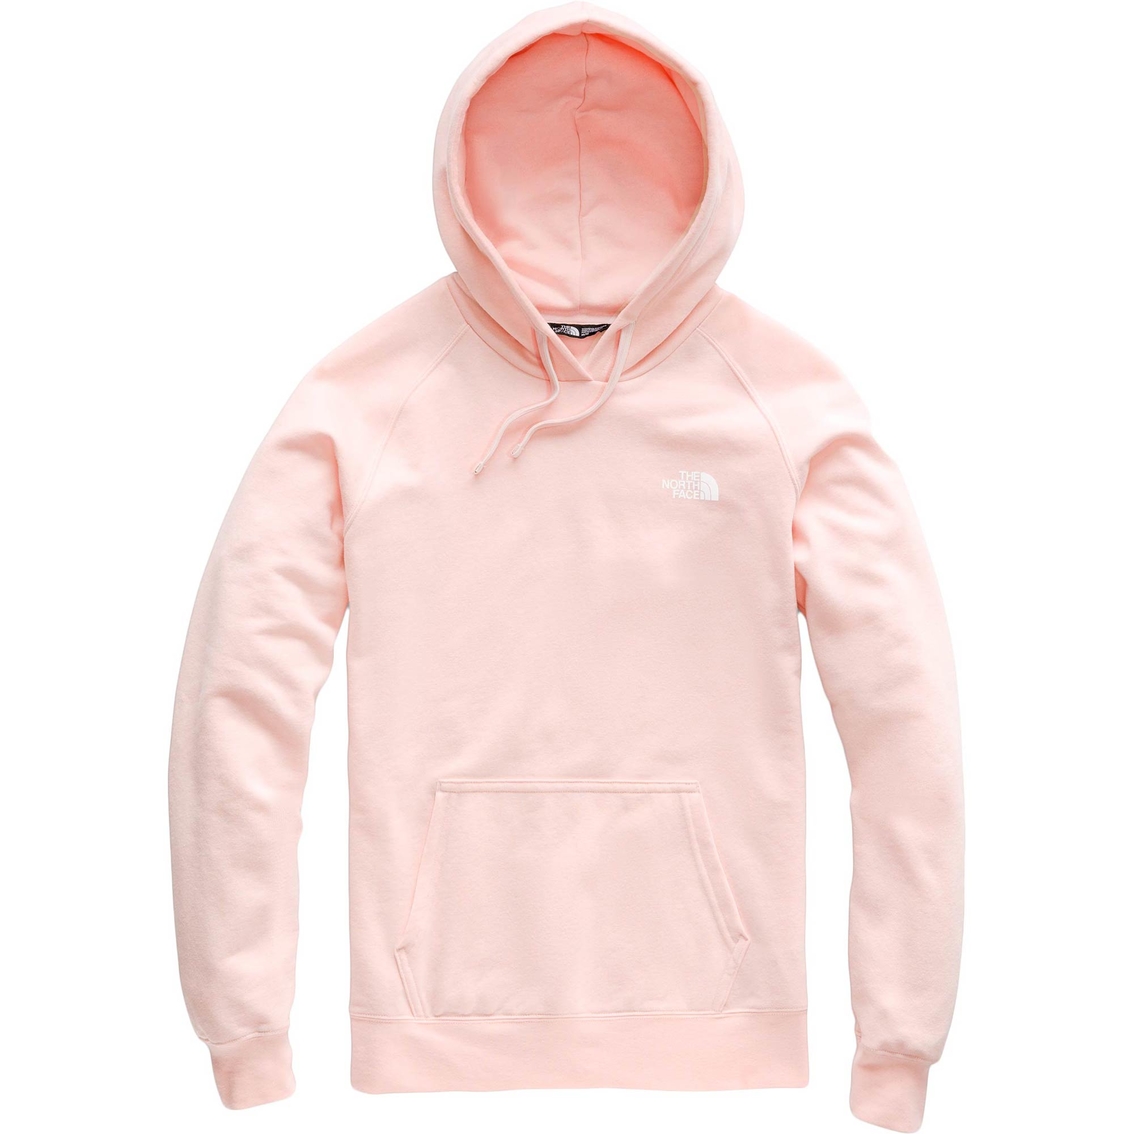 The North Face Red Box Pullover Hoodie Hoodies Sweatshirts Clothing Accessories Shop The Exchange